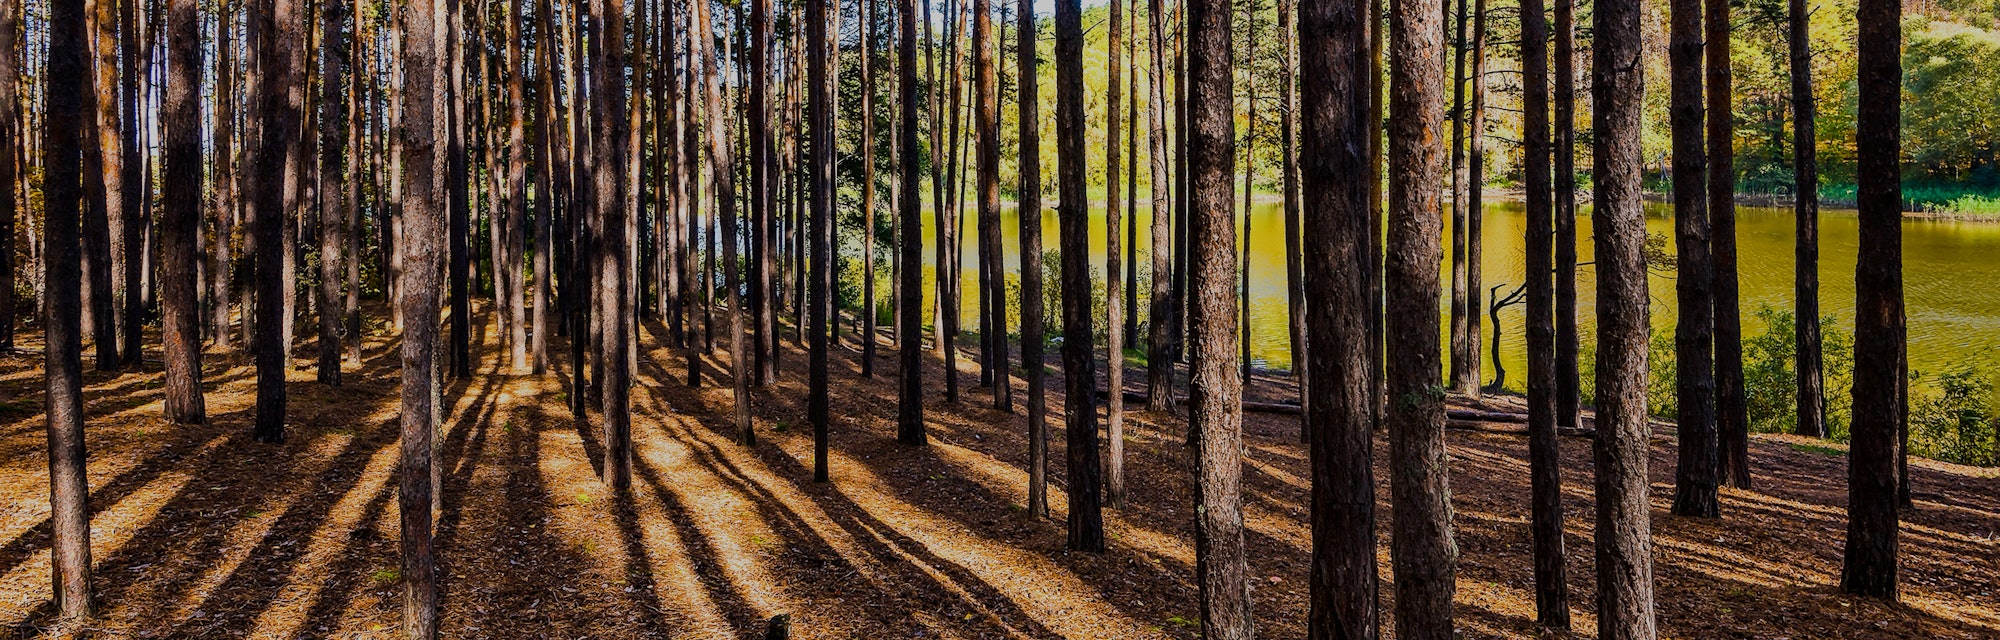 Pine tree forest. Forest trees shadows. Pine forest trees. Forest trees